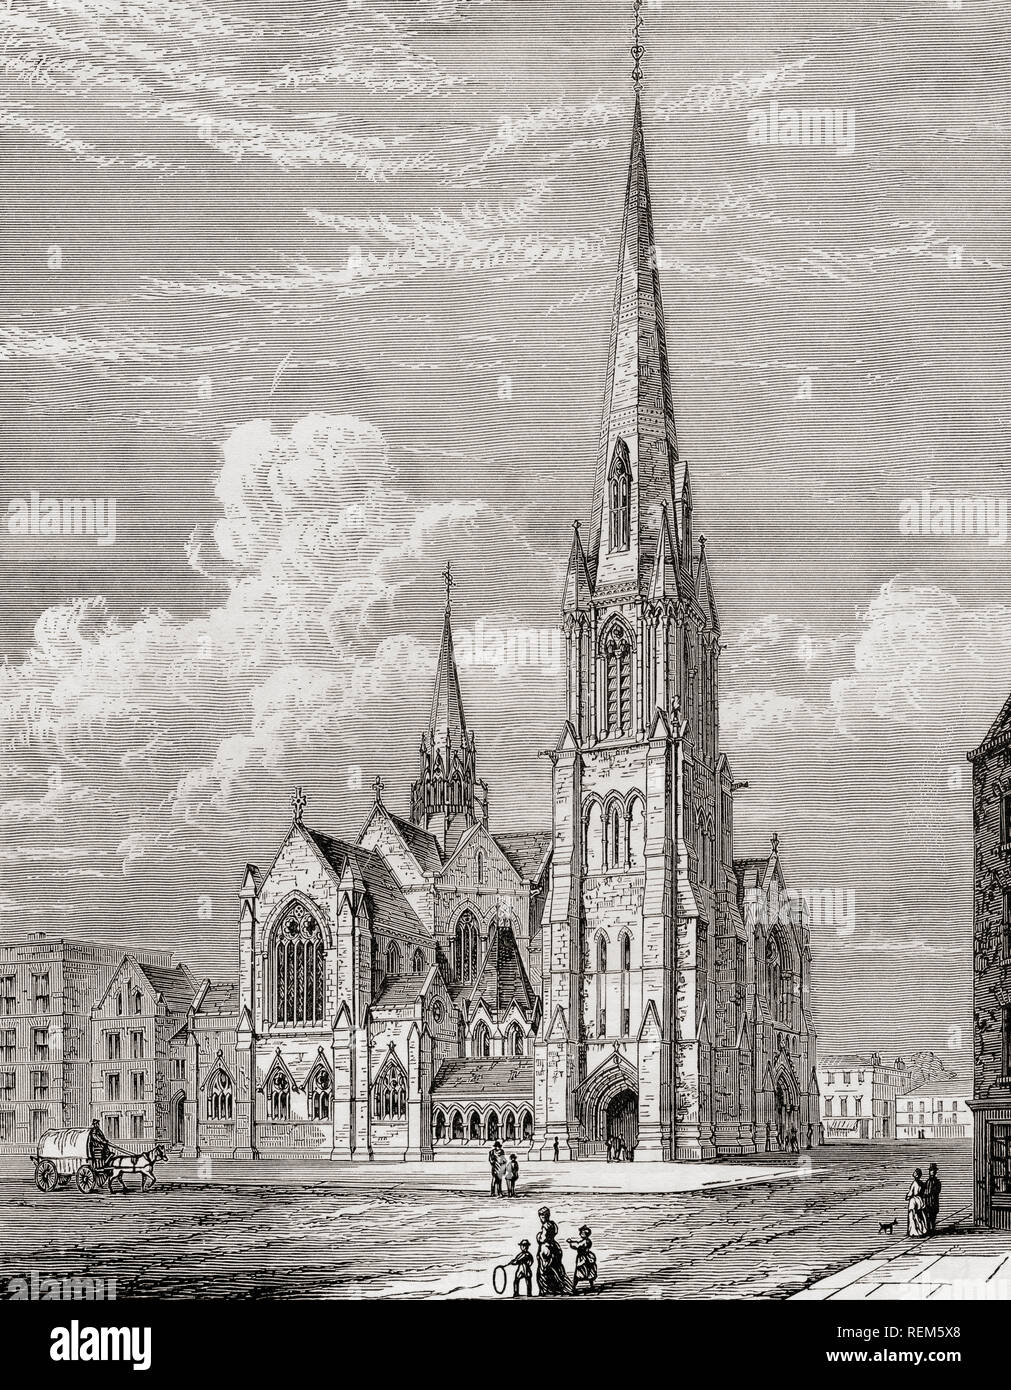 Christ Church, Westminster Bridge Road, Lambeth, London, England, seen here in the 19th century.  From London Pictures, published 1890 Stock Photo